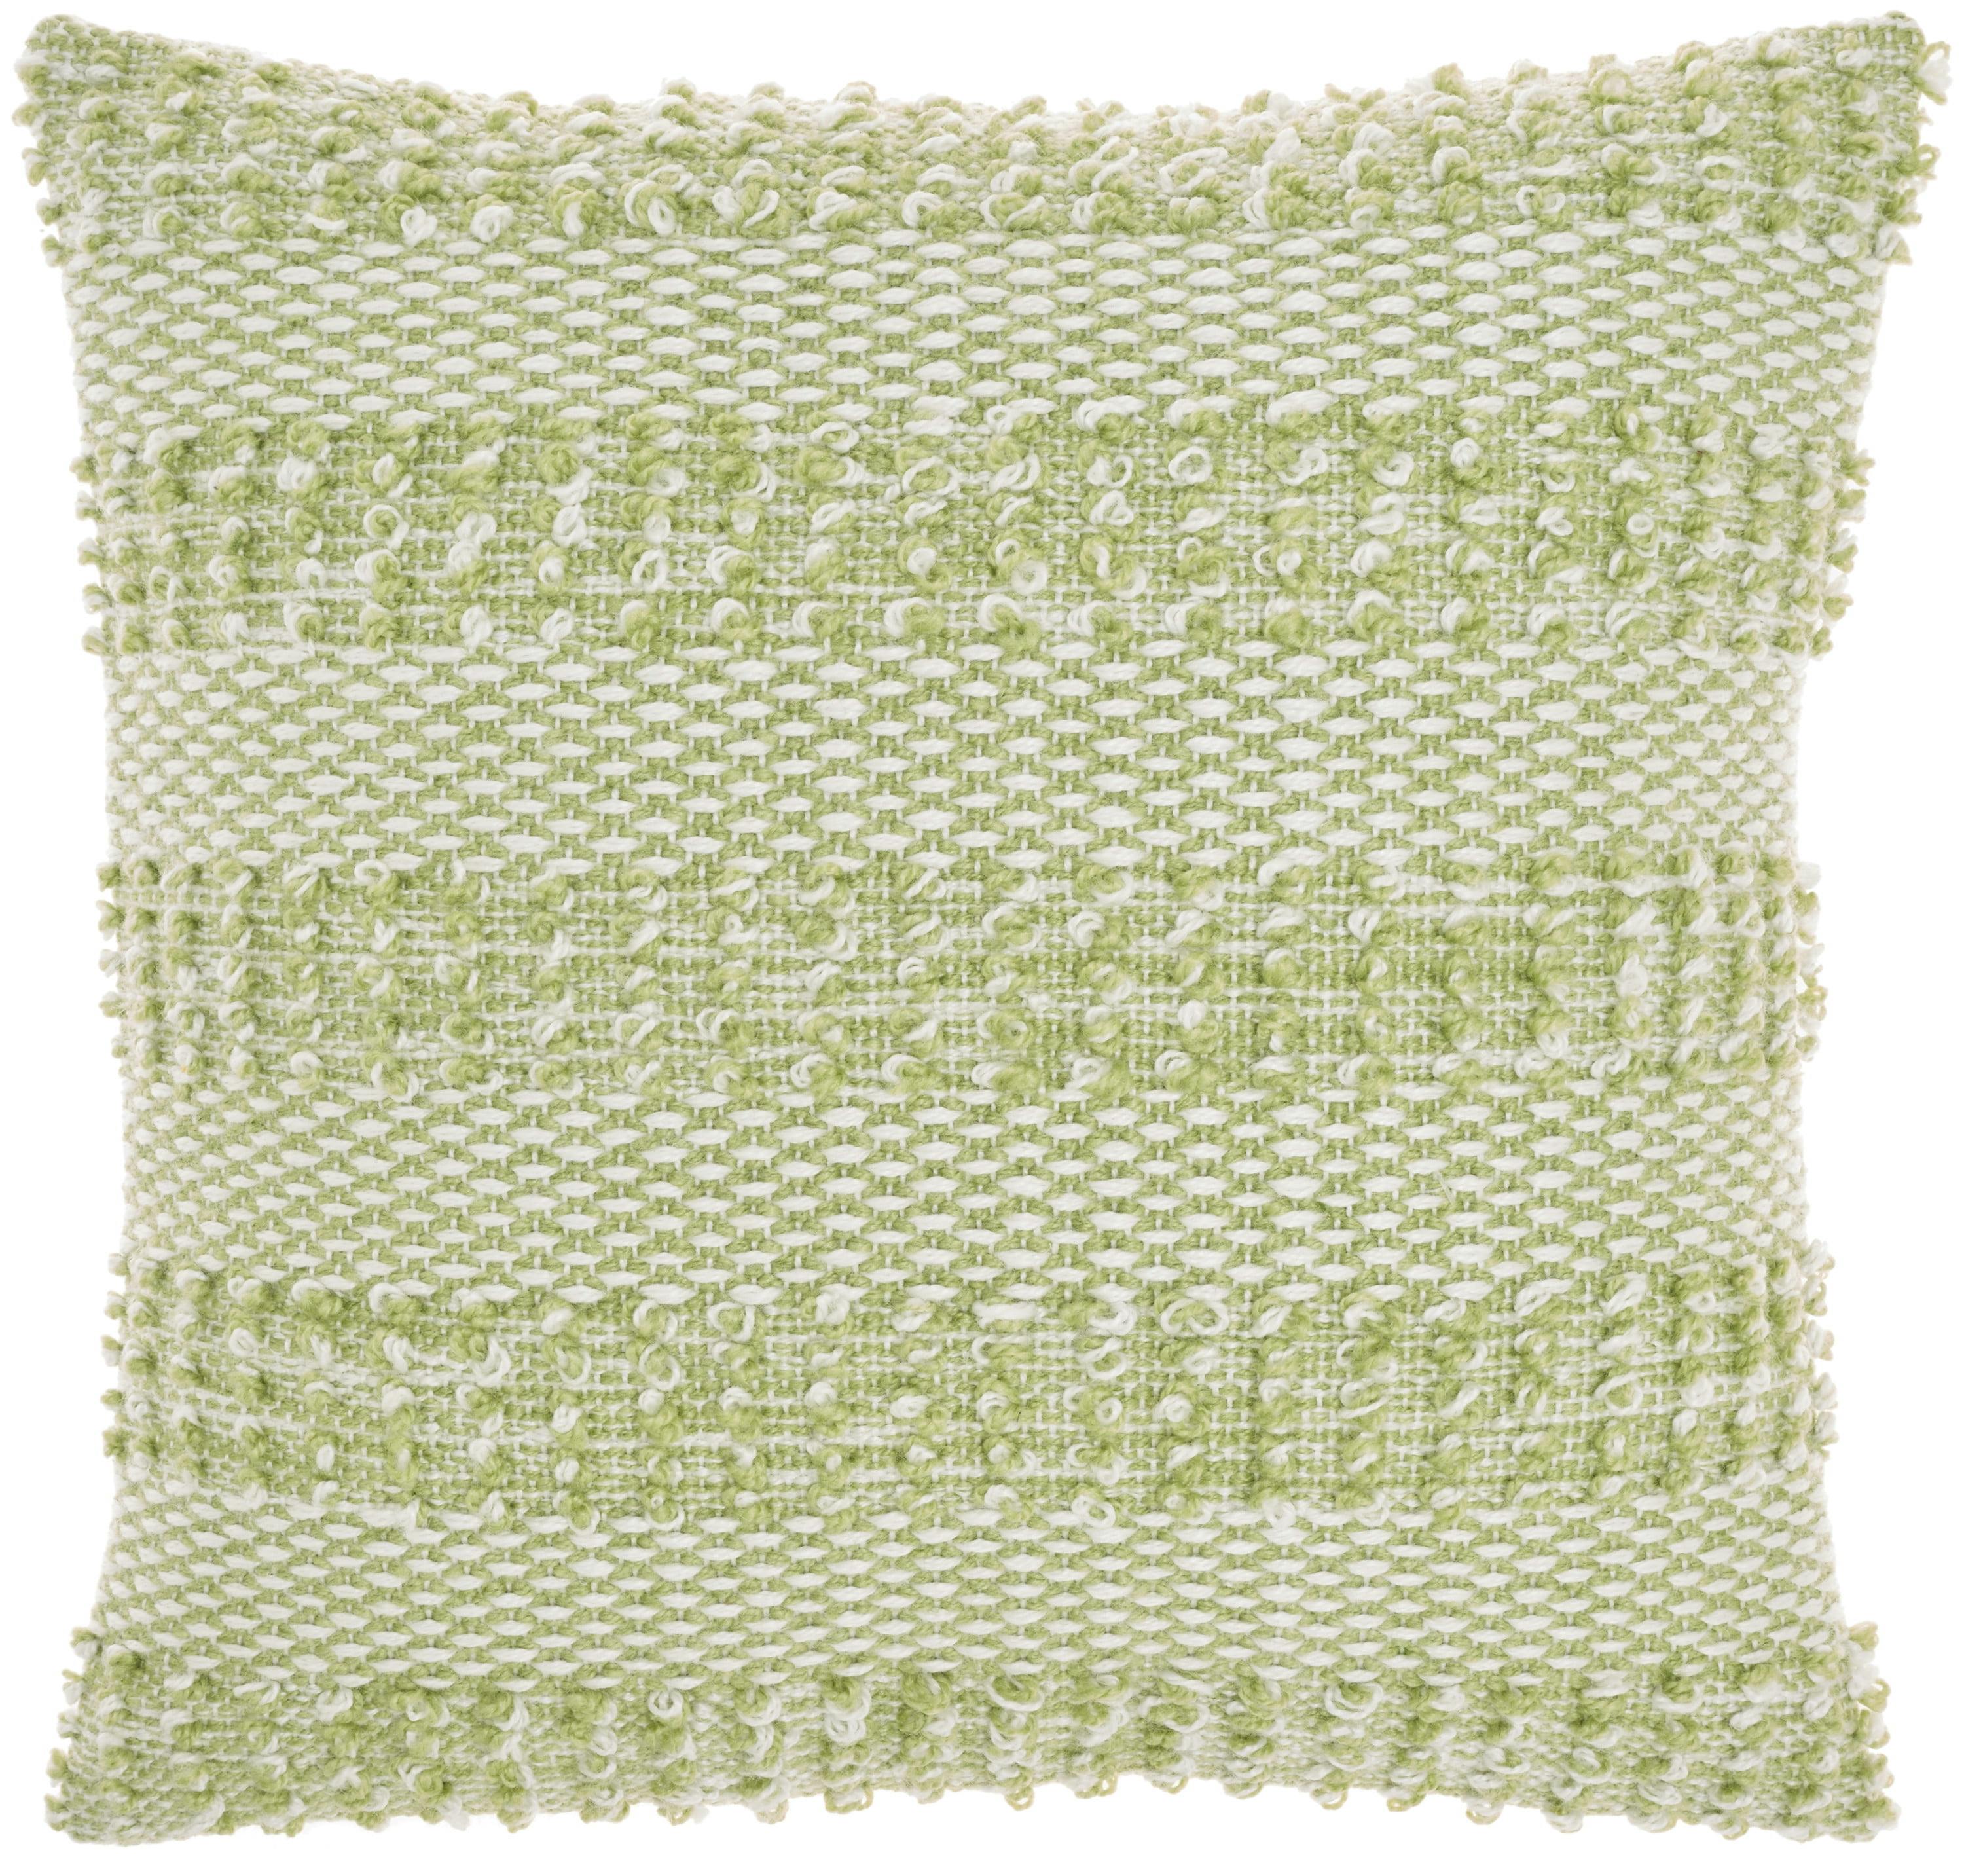 Bright Green 18"x18" Woven Striped Outdoor & Indoor Throw Pillow